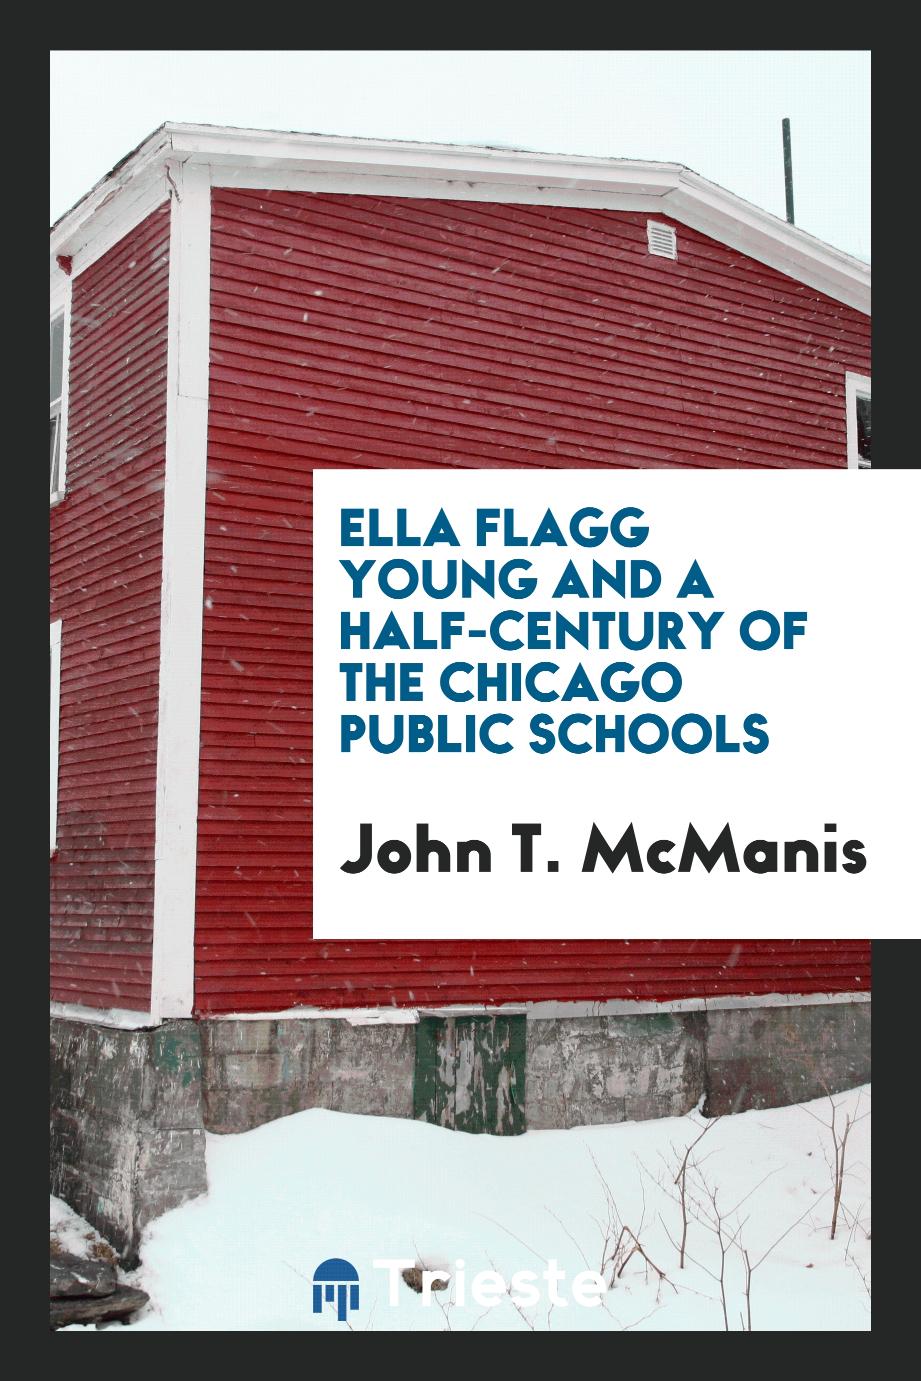 Ella Flagg Young and a half-century of the Chicago public schools